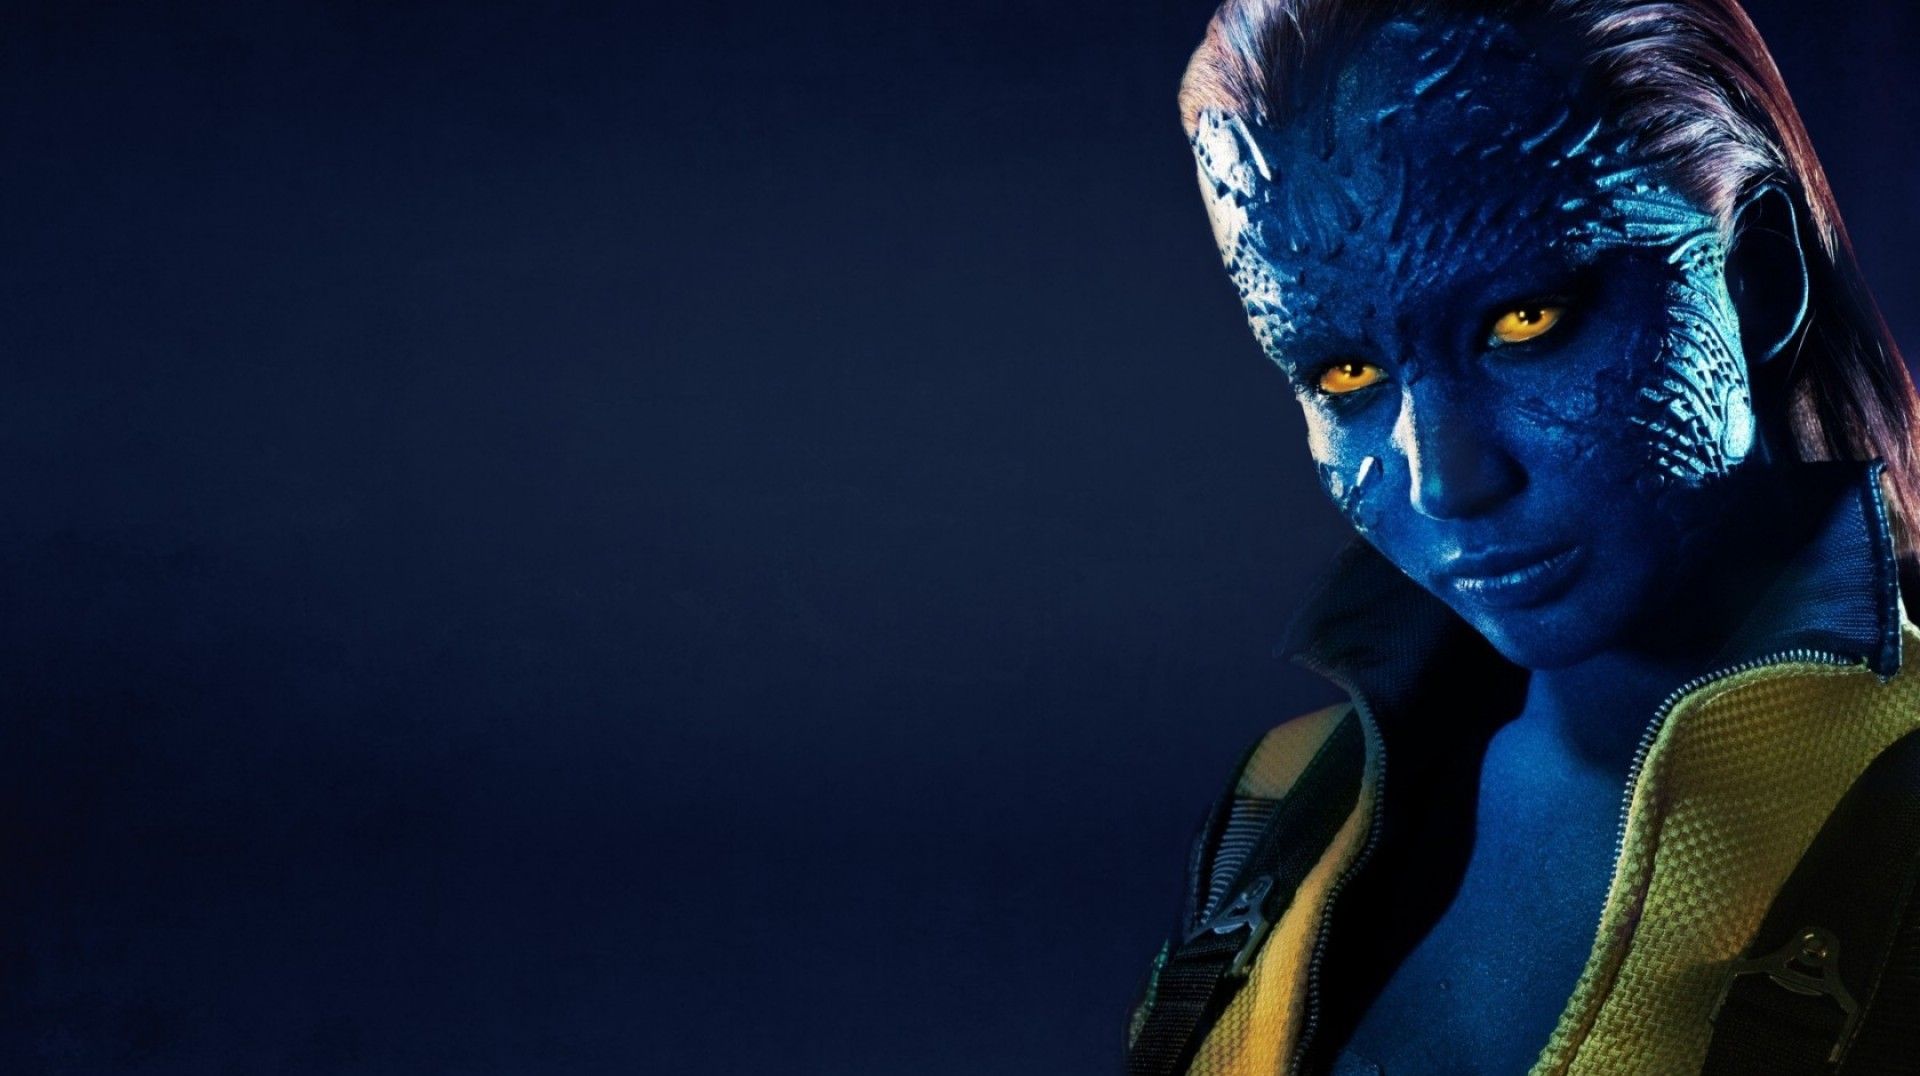 Jennifer Lawrence to star in a Mystique spin-off?